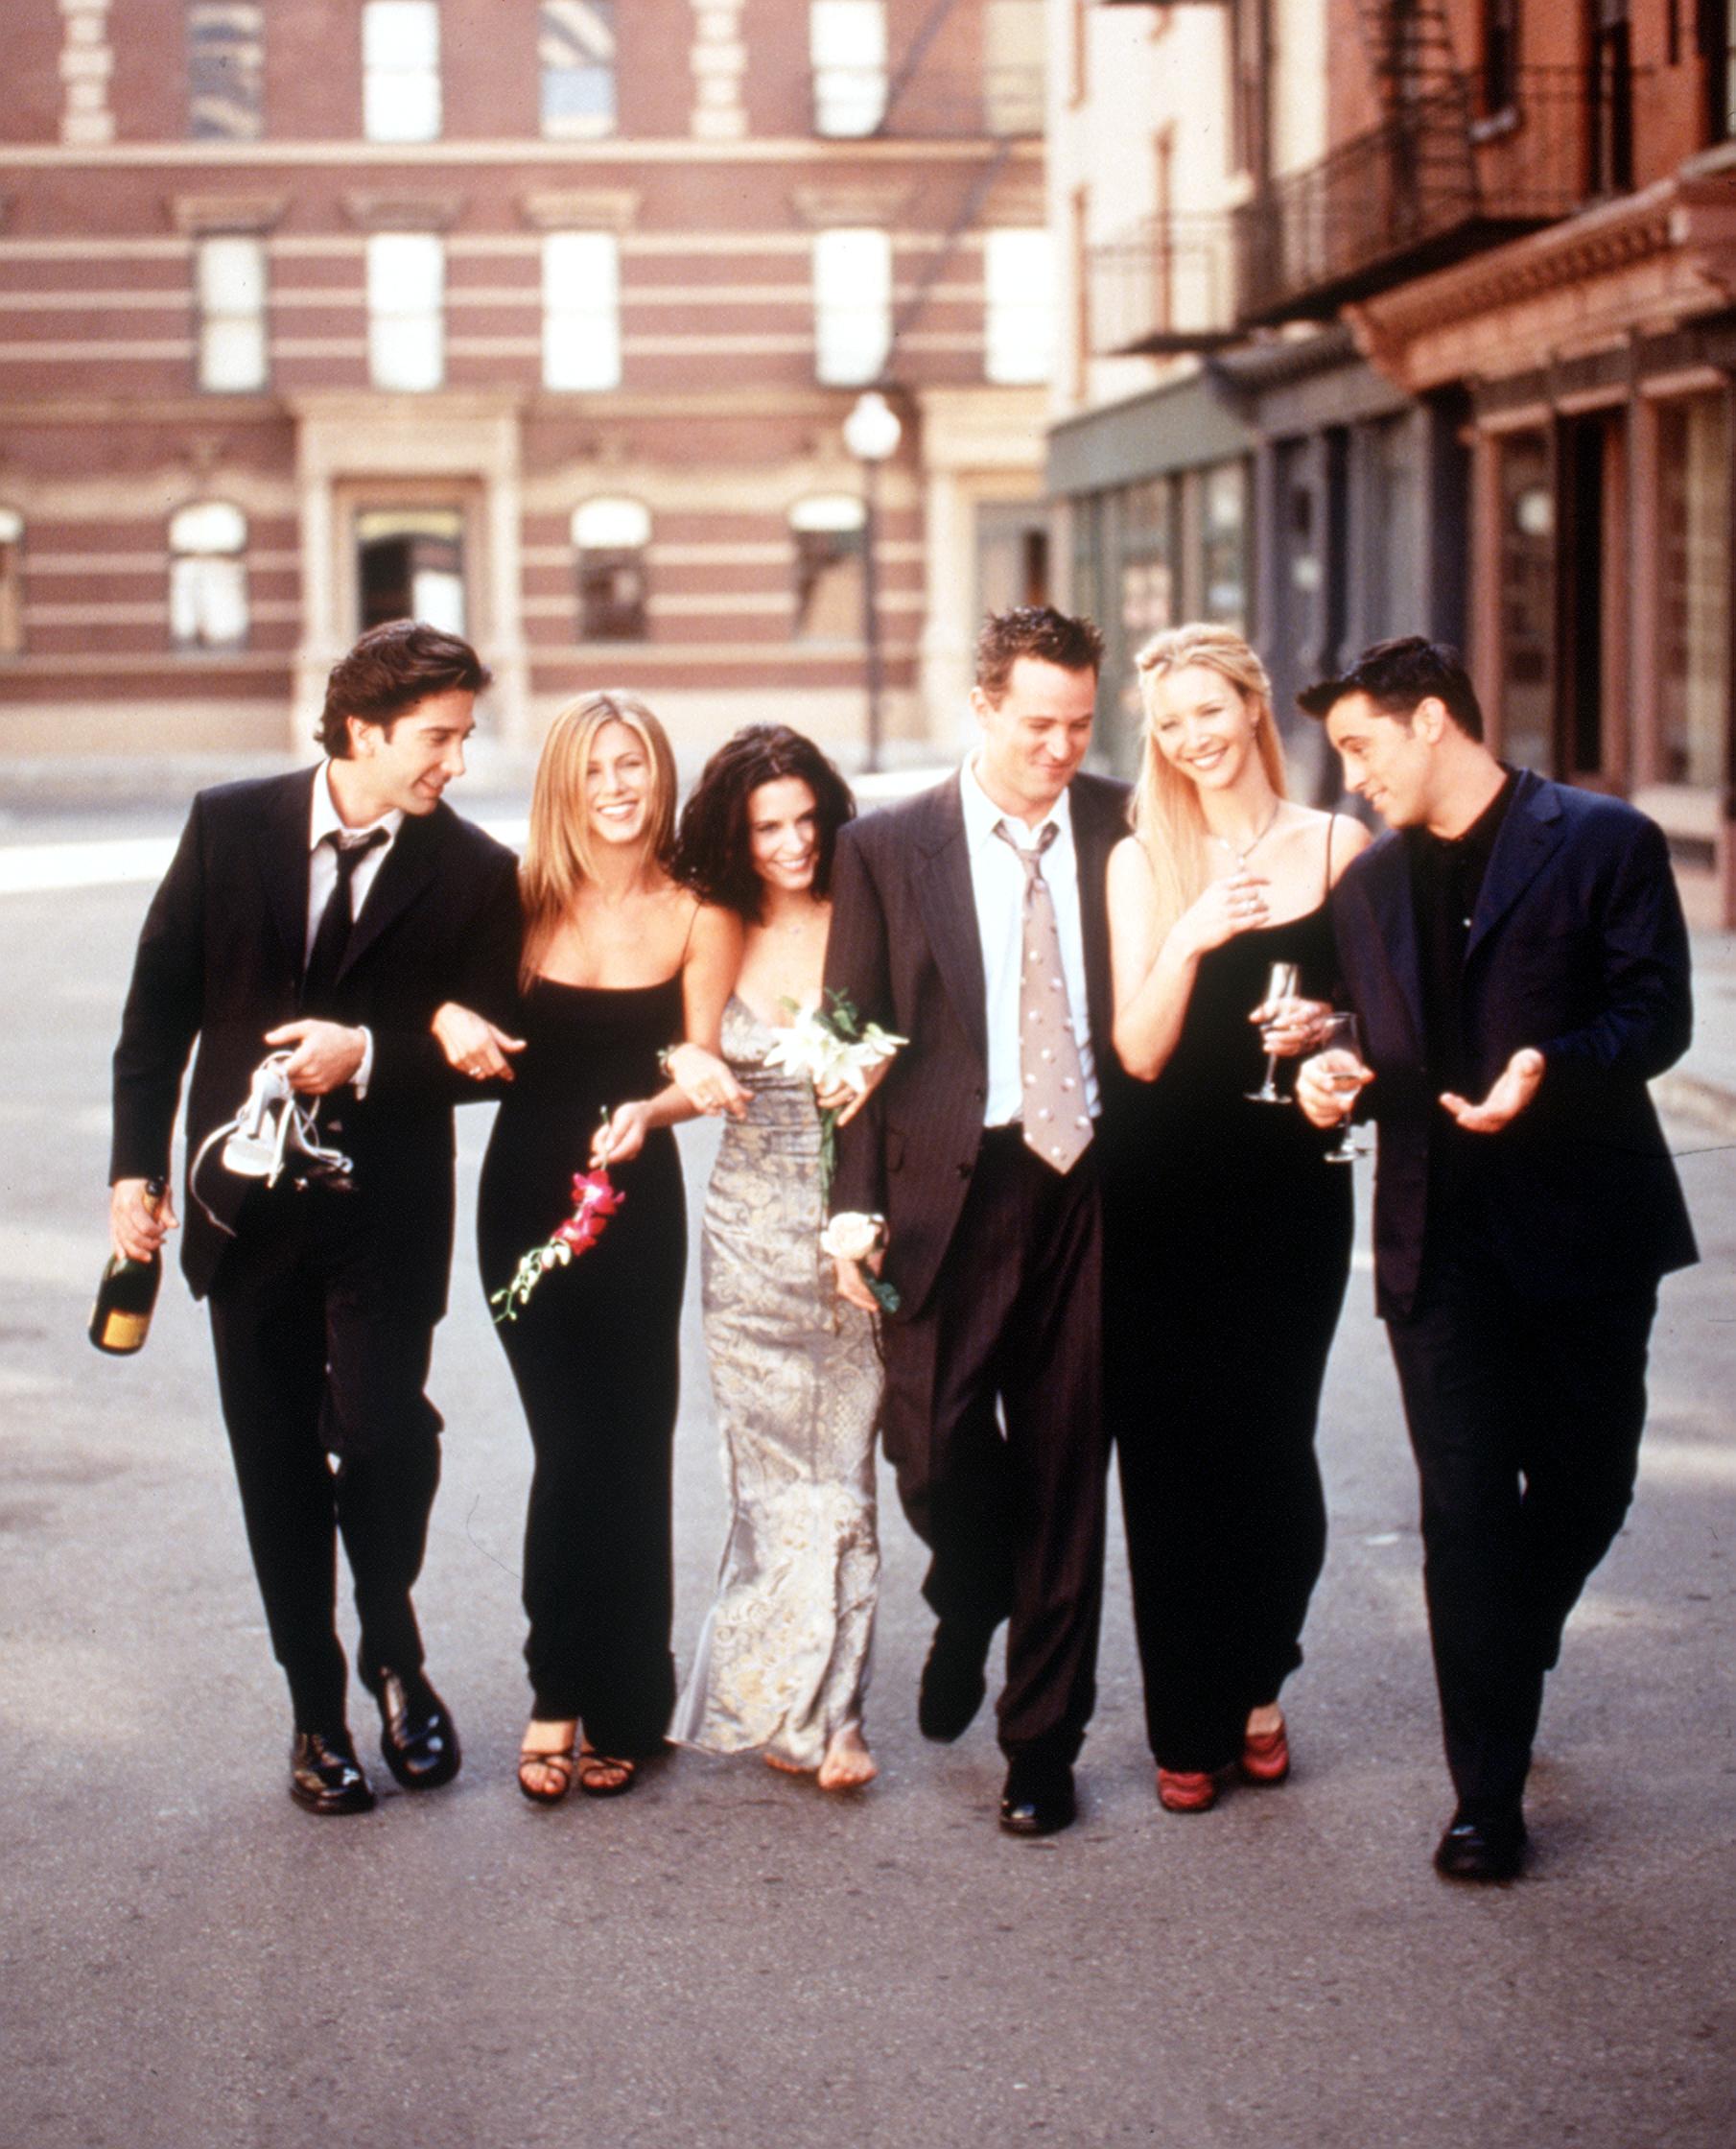 The Cast Of "Friends" 1999-2000 Season. From L-R: David Schwimmer, Jennifer Aniston, Courteney Cox Arquette, Matthew Perry, Lisa Kudrow And Matt Leblanc. | Source: Getty Images.